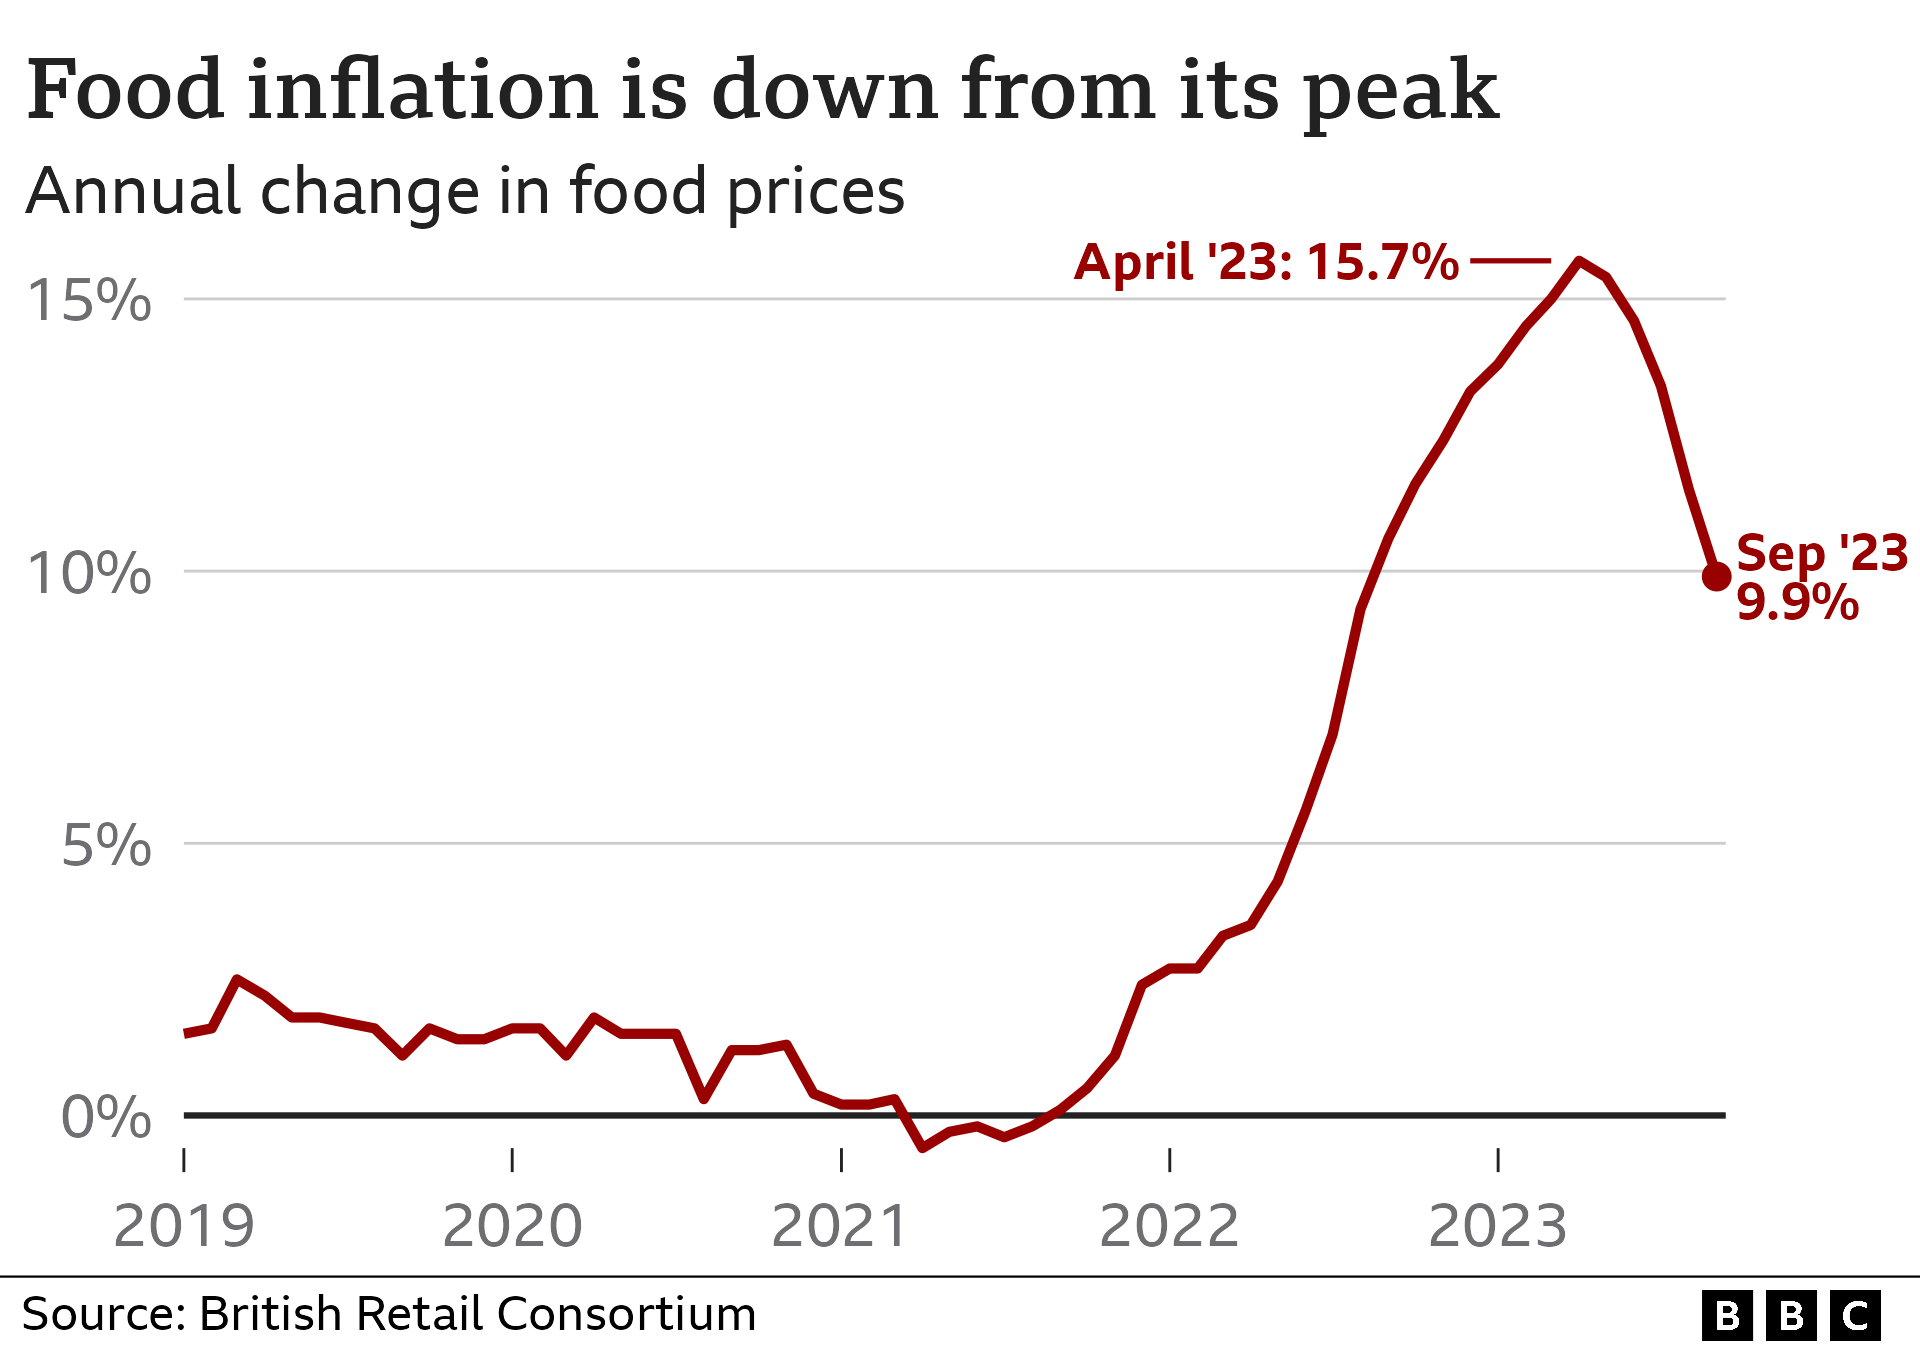 Line chart showing the British Retail Consortium's food inflation at 9.9% in September 2023, down from a high of 15.7% in April.